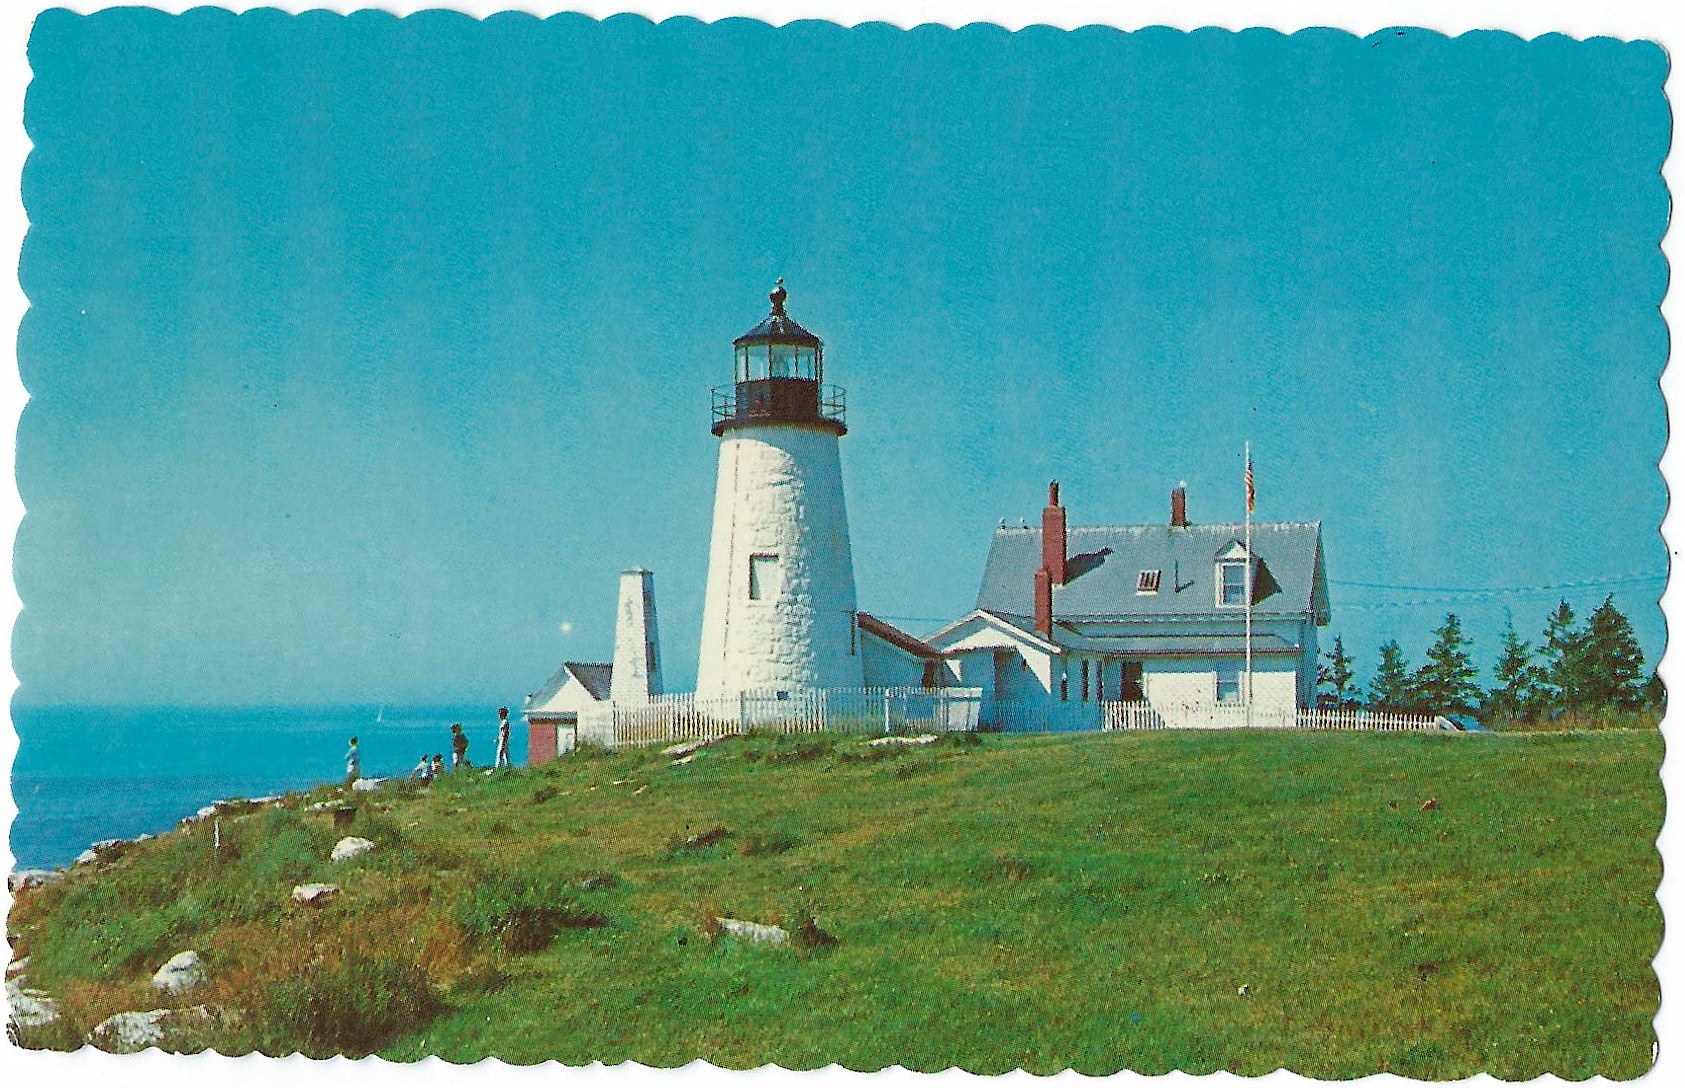 THE LIGHTHOUSE at Pemaquid Point, Maine Postcard M-2264 32670-C